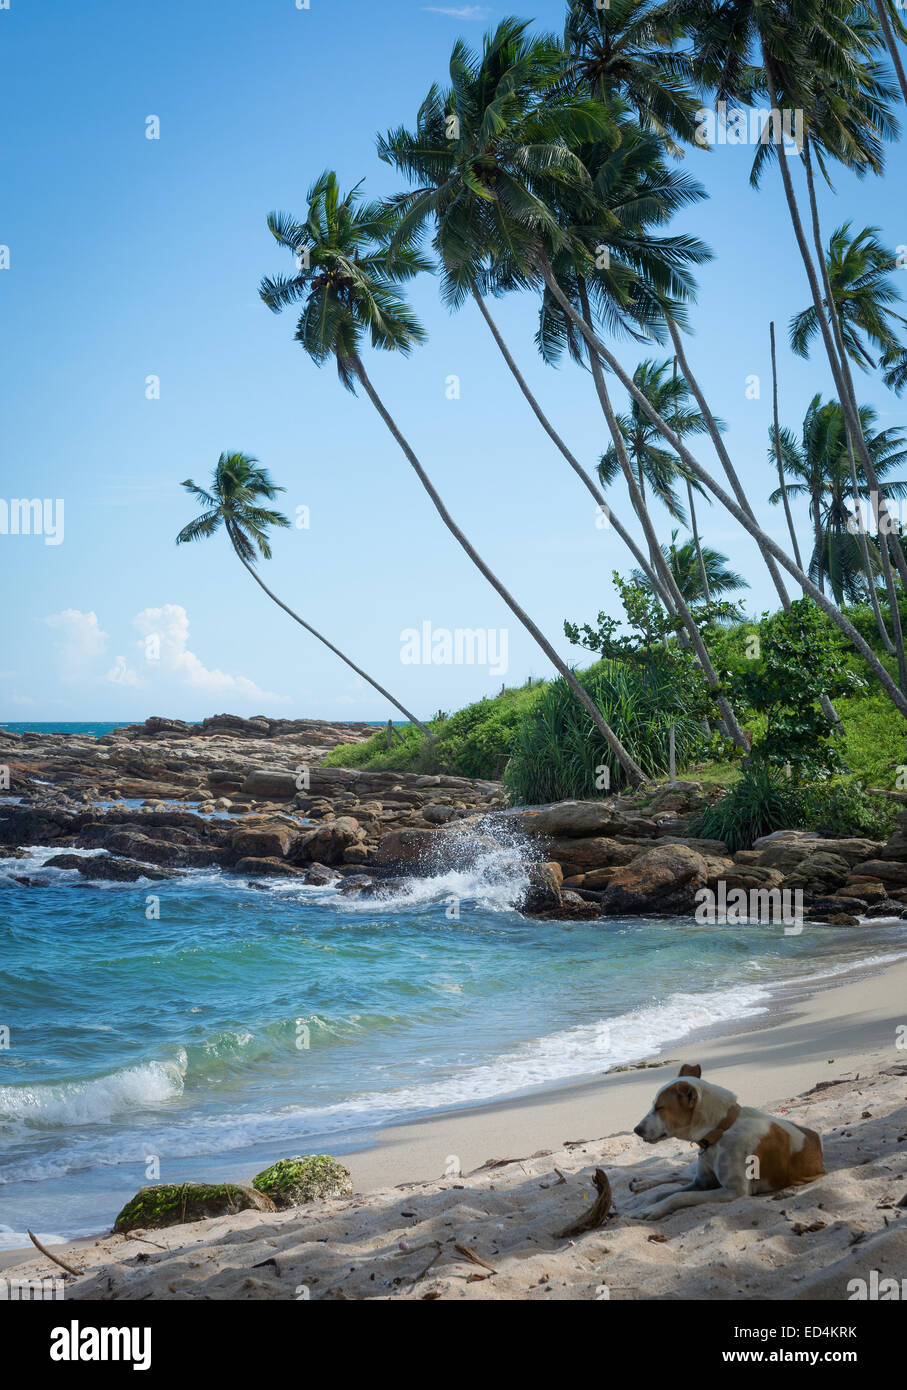 Dog resting on tropical rocky beach with coconut palm trees, sandy beach and ocean. Tangalle, Southern Province, Sri Lanka, Asia Stock Photo